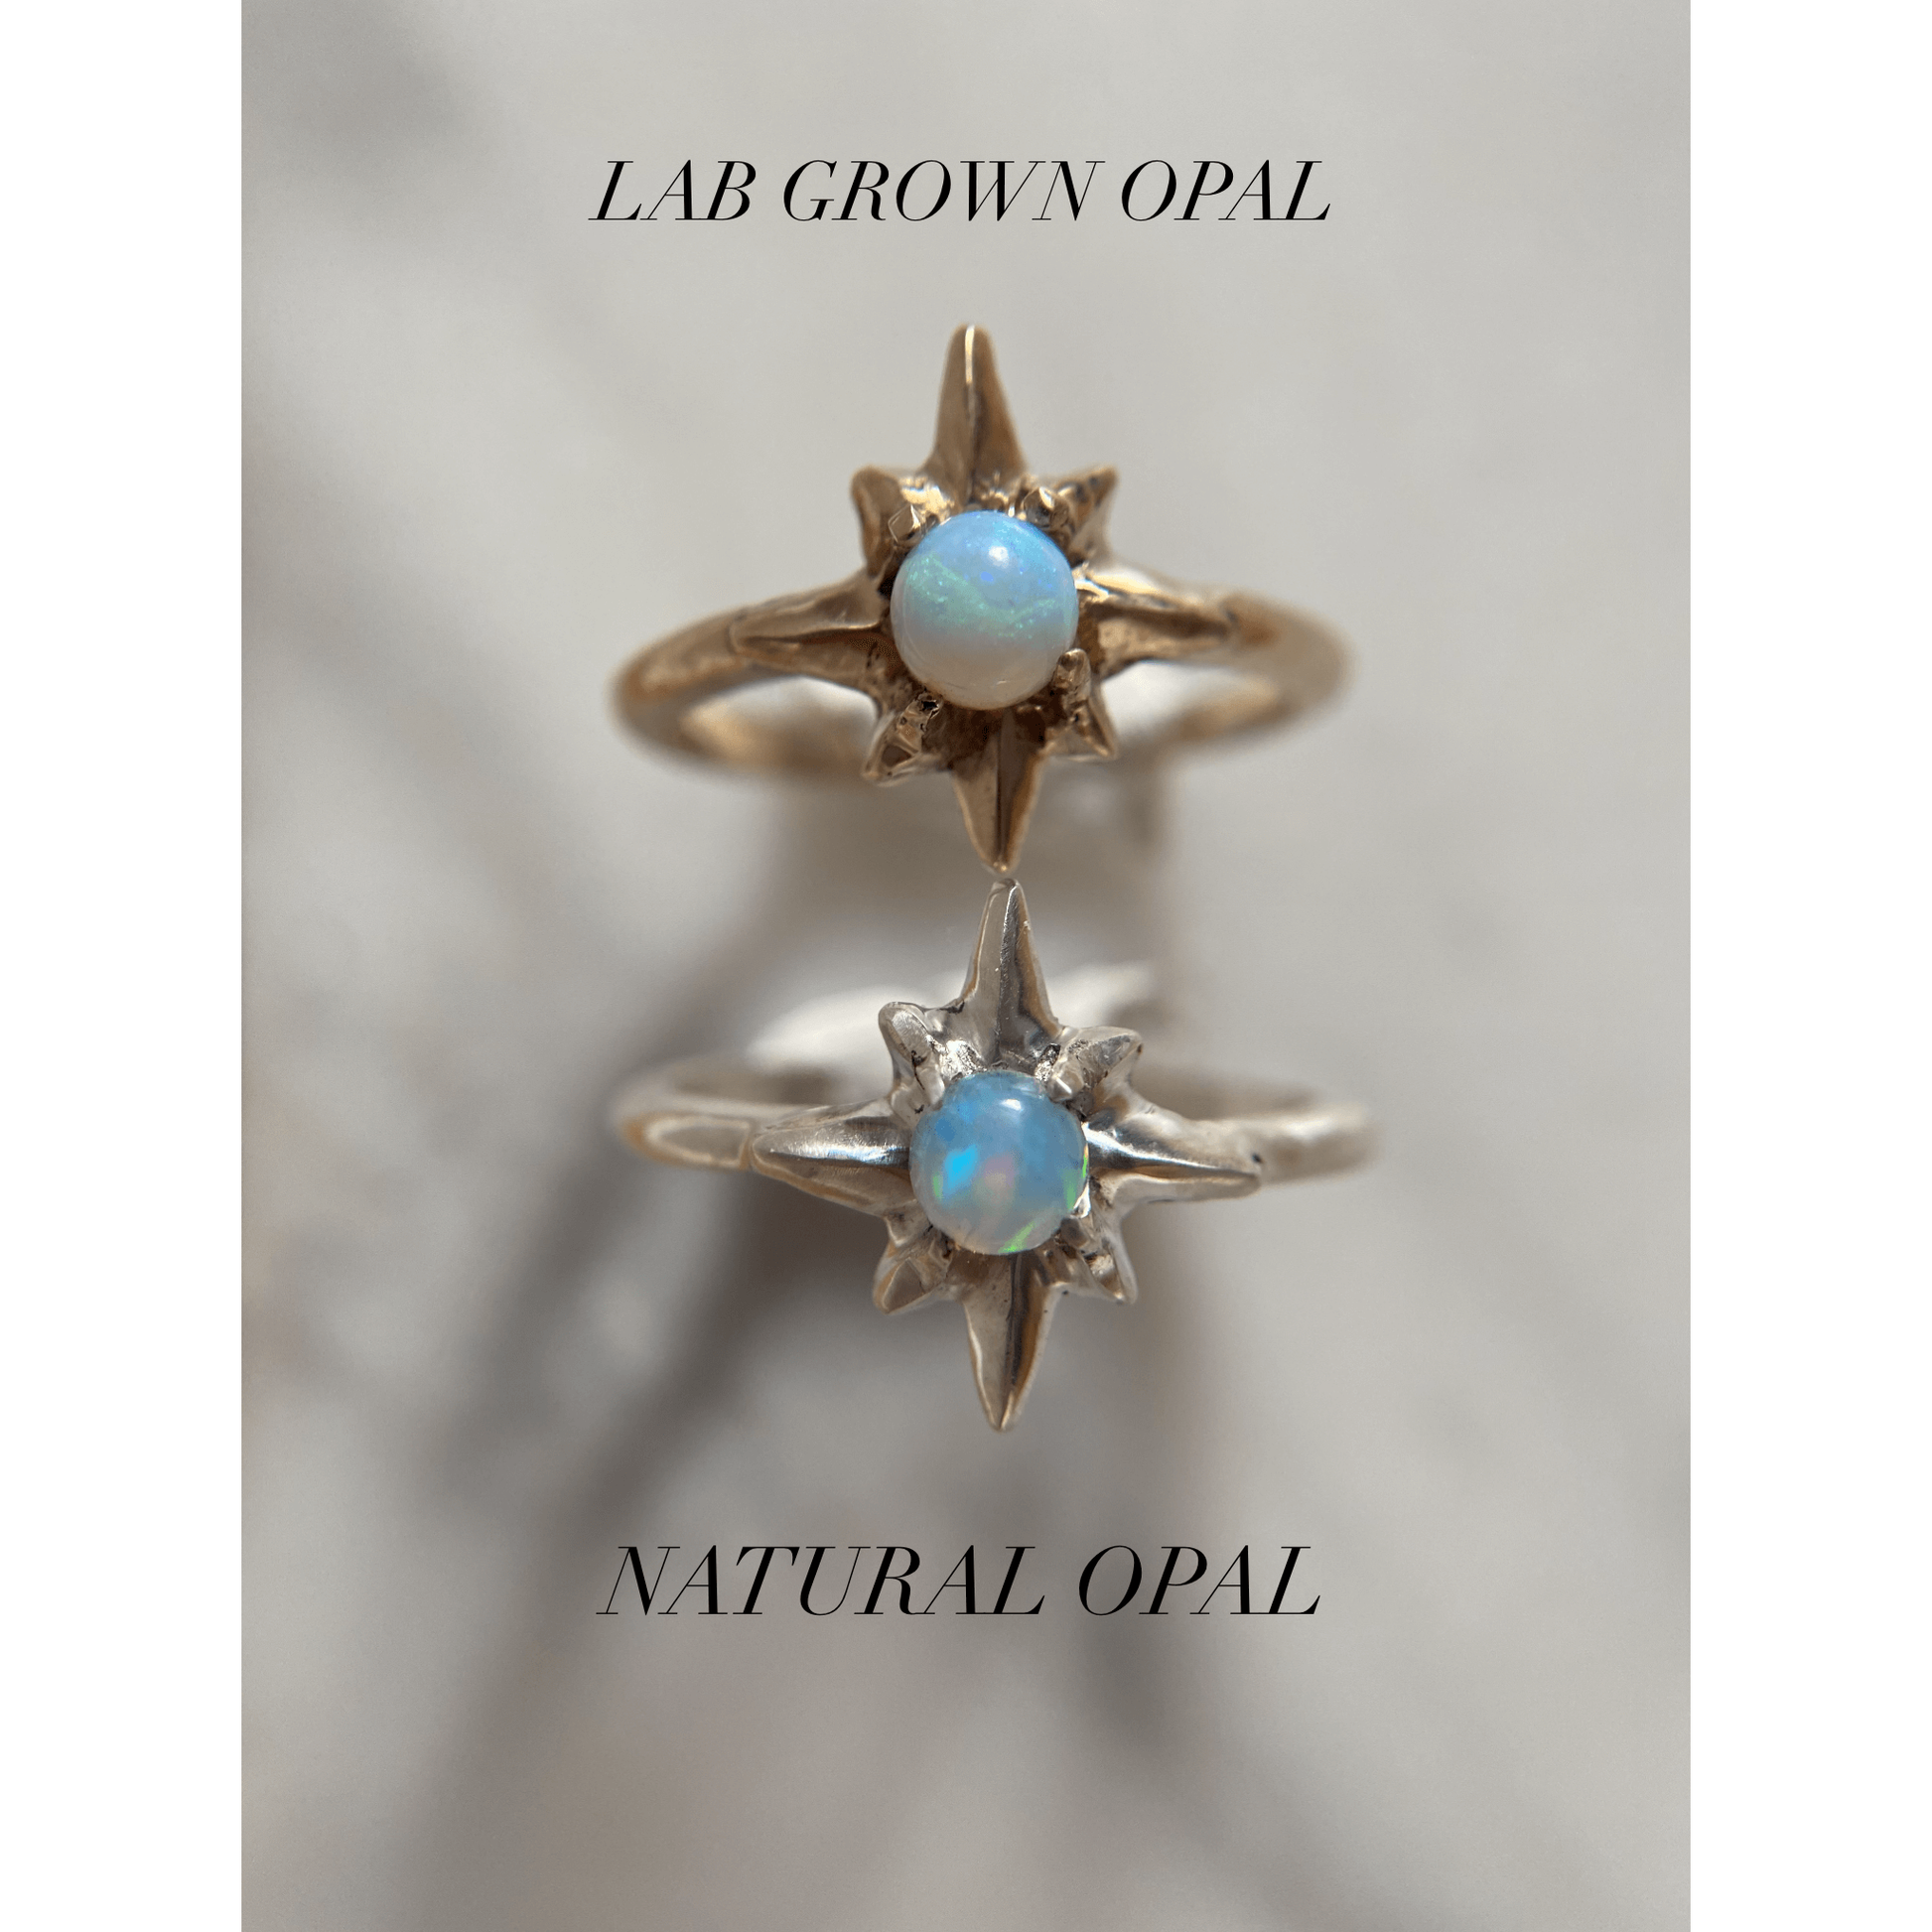 Silver north star ring set with a 5mm sustainably sourced opal compared with a lab created opa set in gold tone bronze, made by Iron Oxide Designs